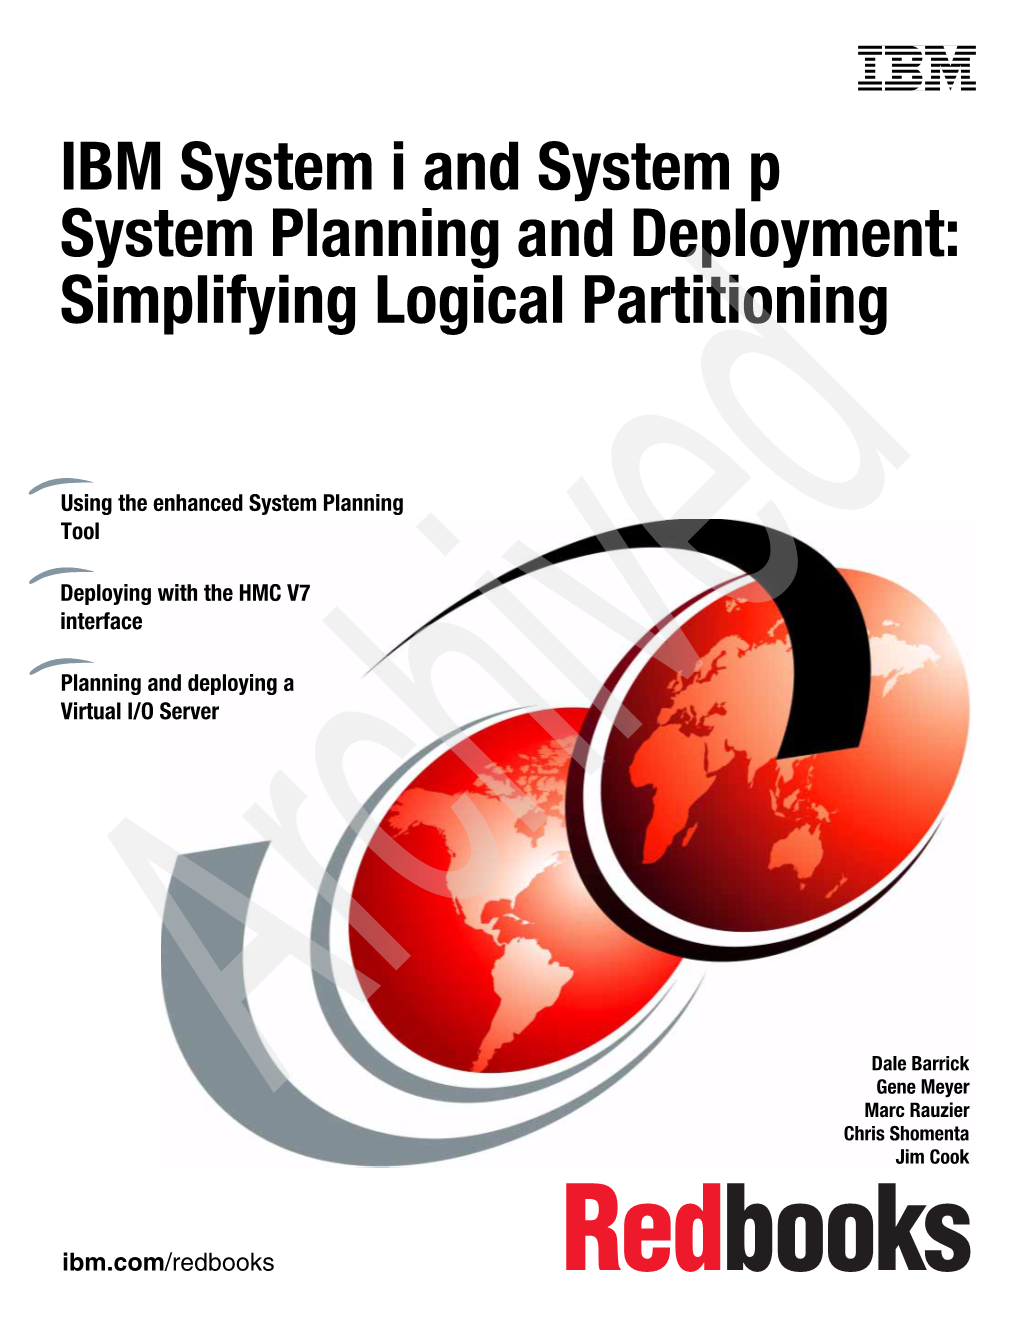 IBM System I and System P System Planning and Deployment: Simplifying Logical Partitioning